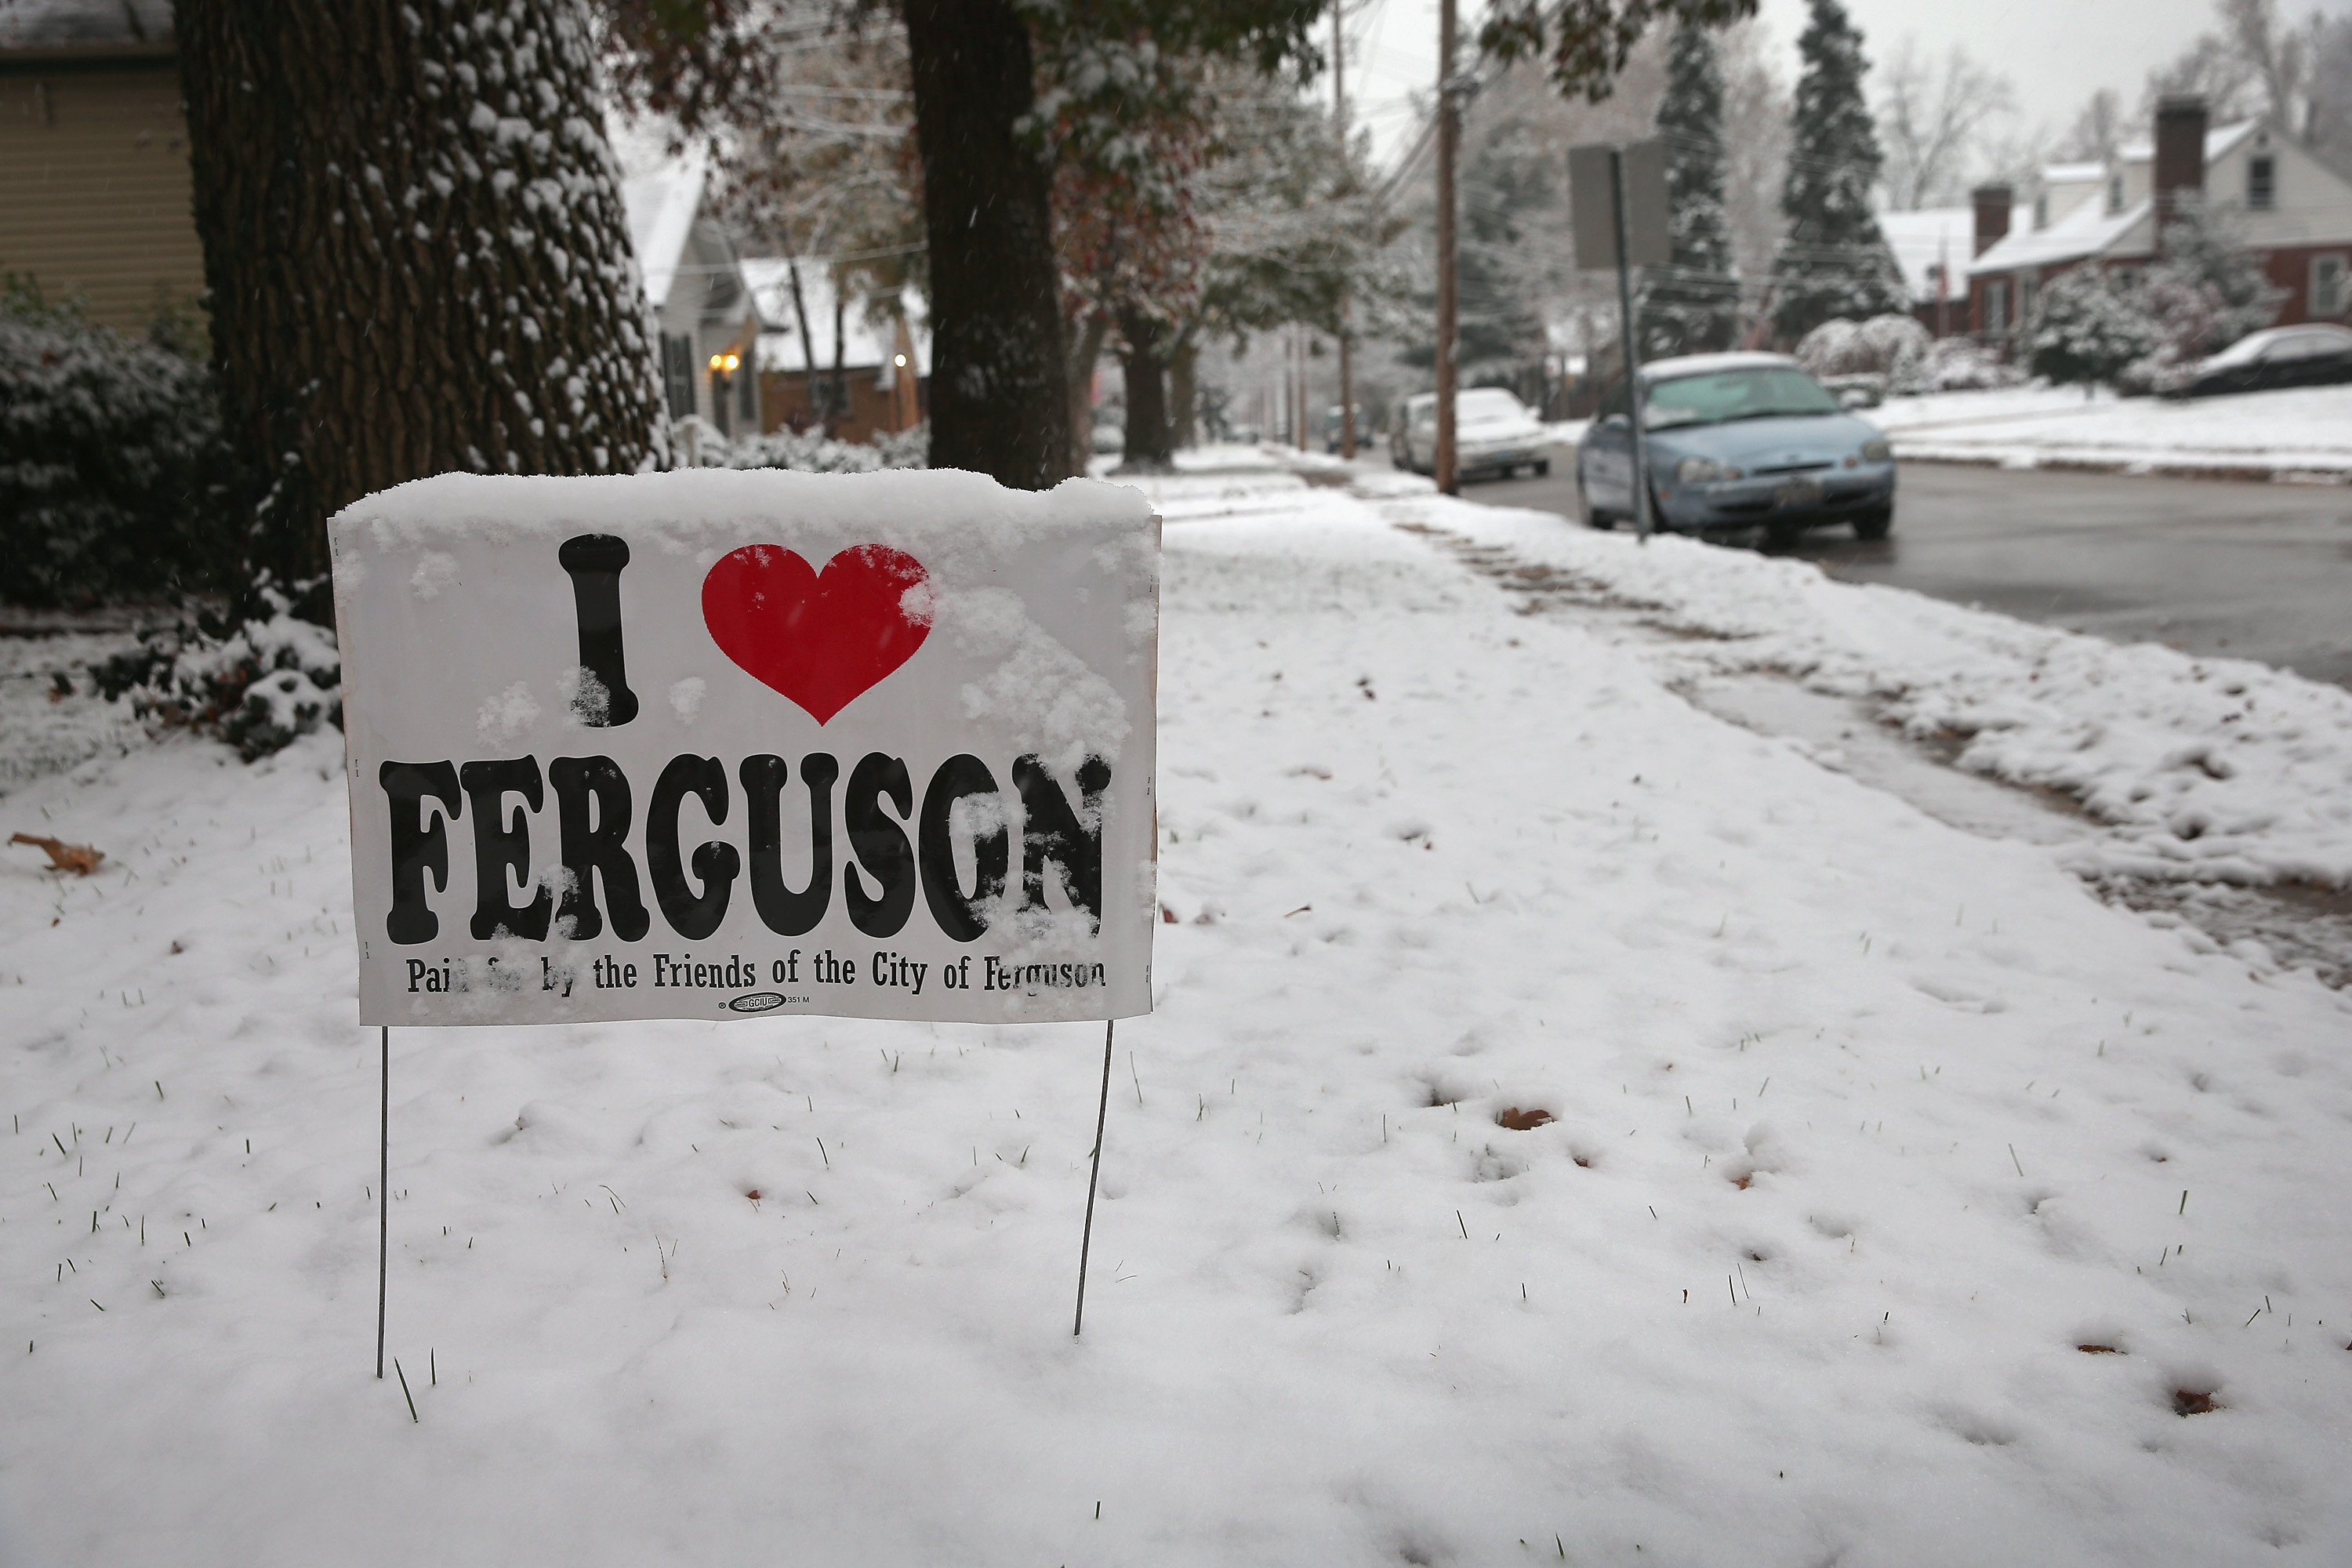 Snow covers a yard sign placed outside a home near the police station on Nov. 16, 2014 in Ferguson, Missouri.